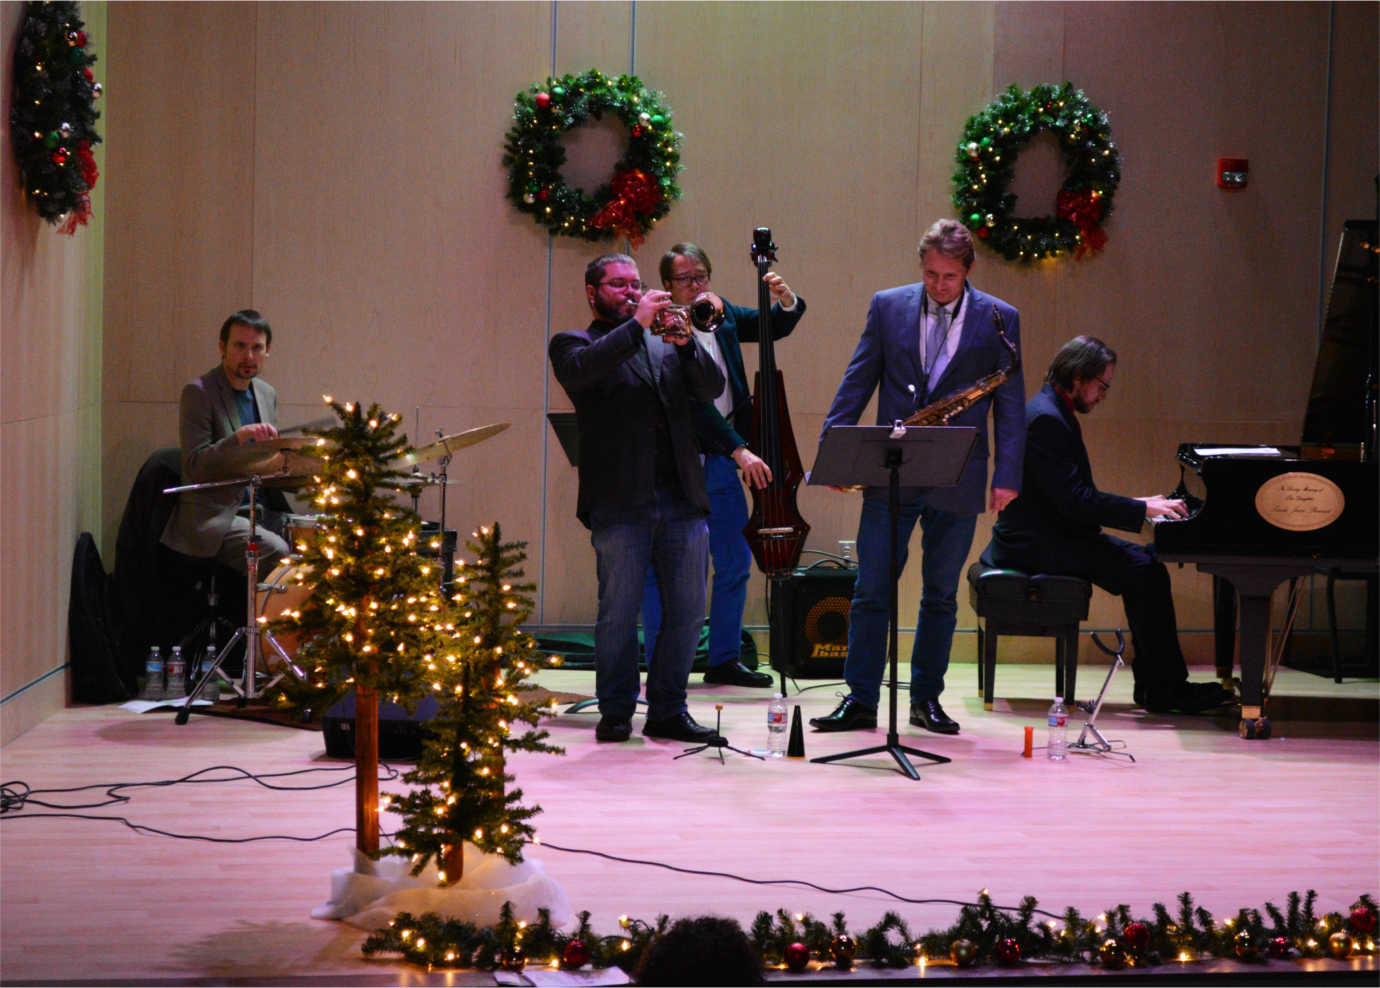 Holiday concerts at the Longmont Museum rank among the community's favorite events. Image courtesy of the Longmont Museum.